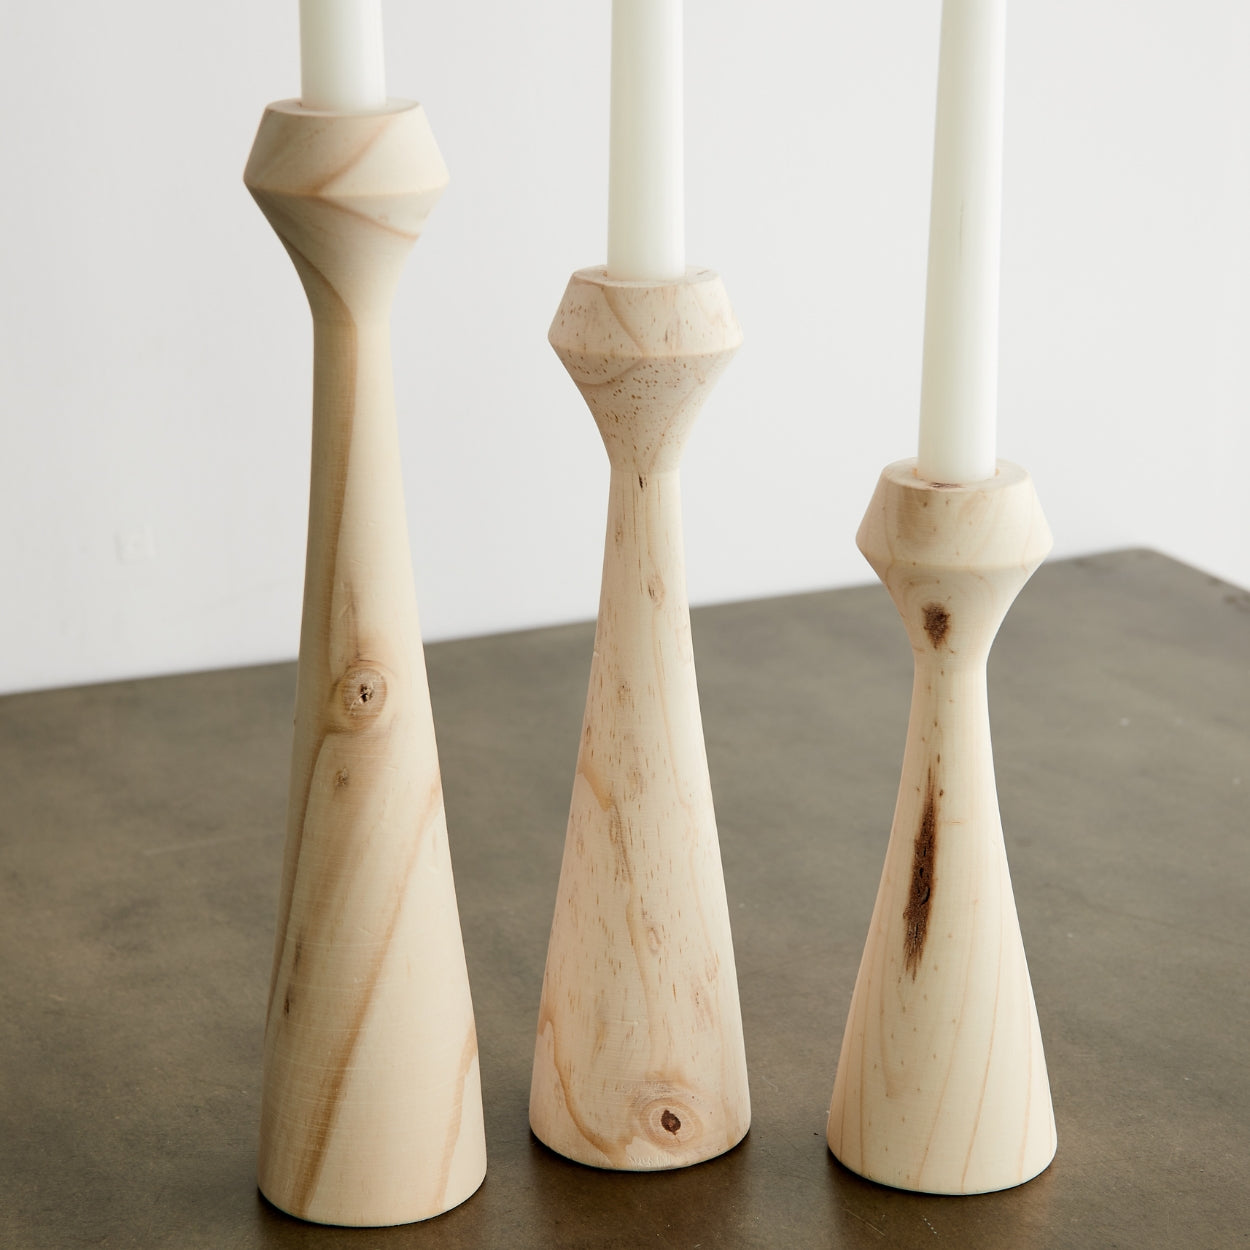 These hand-turned candle holders are expertly crafted by South African artisans that have been in family woodworking businesses for generations. Made from sustainably sourced pine, they are both trend-forward and timeless.